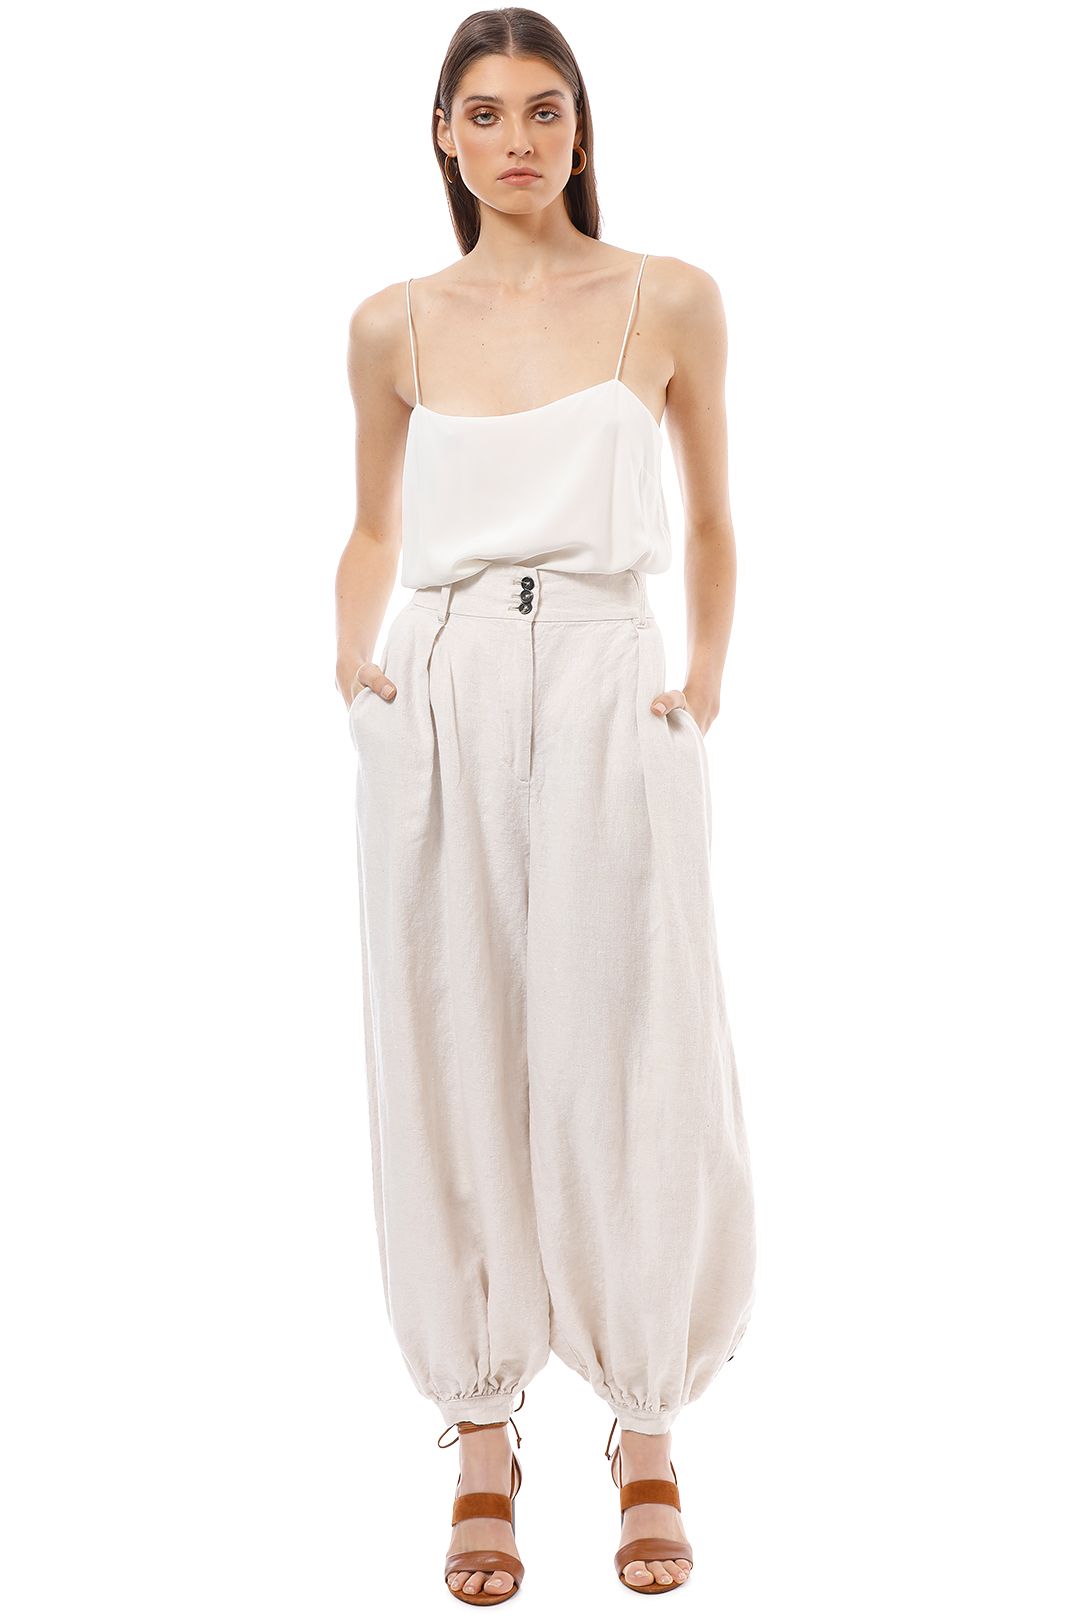 Linen Tailored Harem Pants with Belt by Shona Joy for Hire